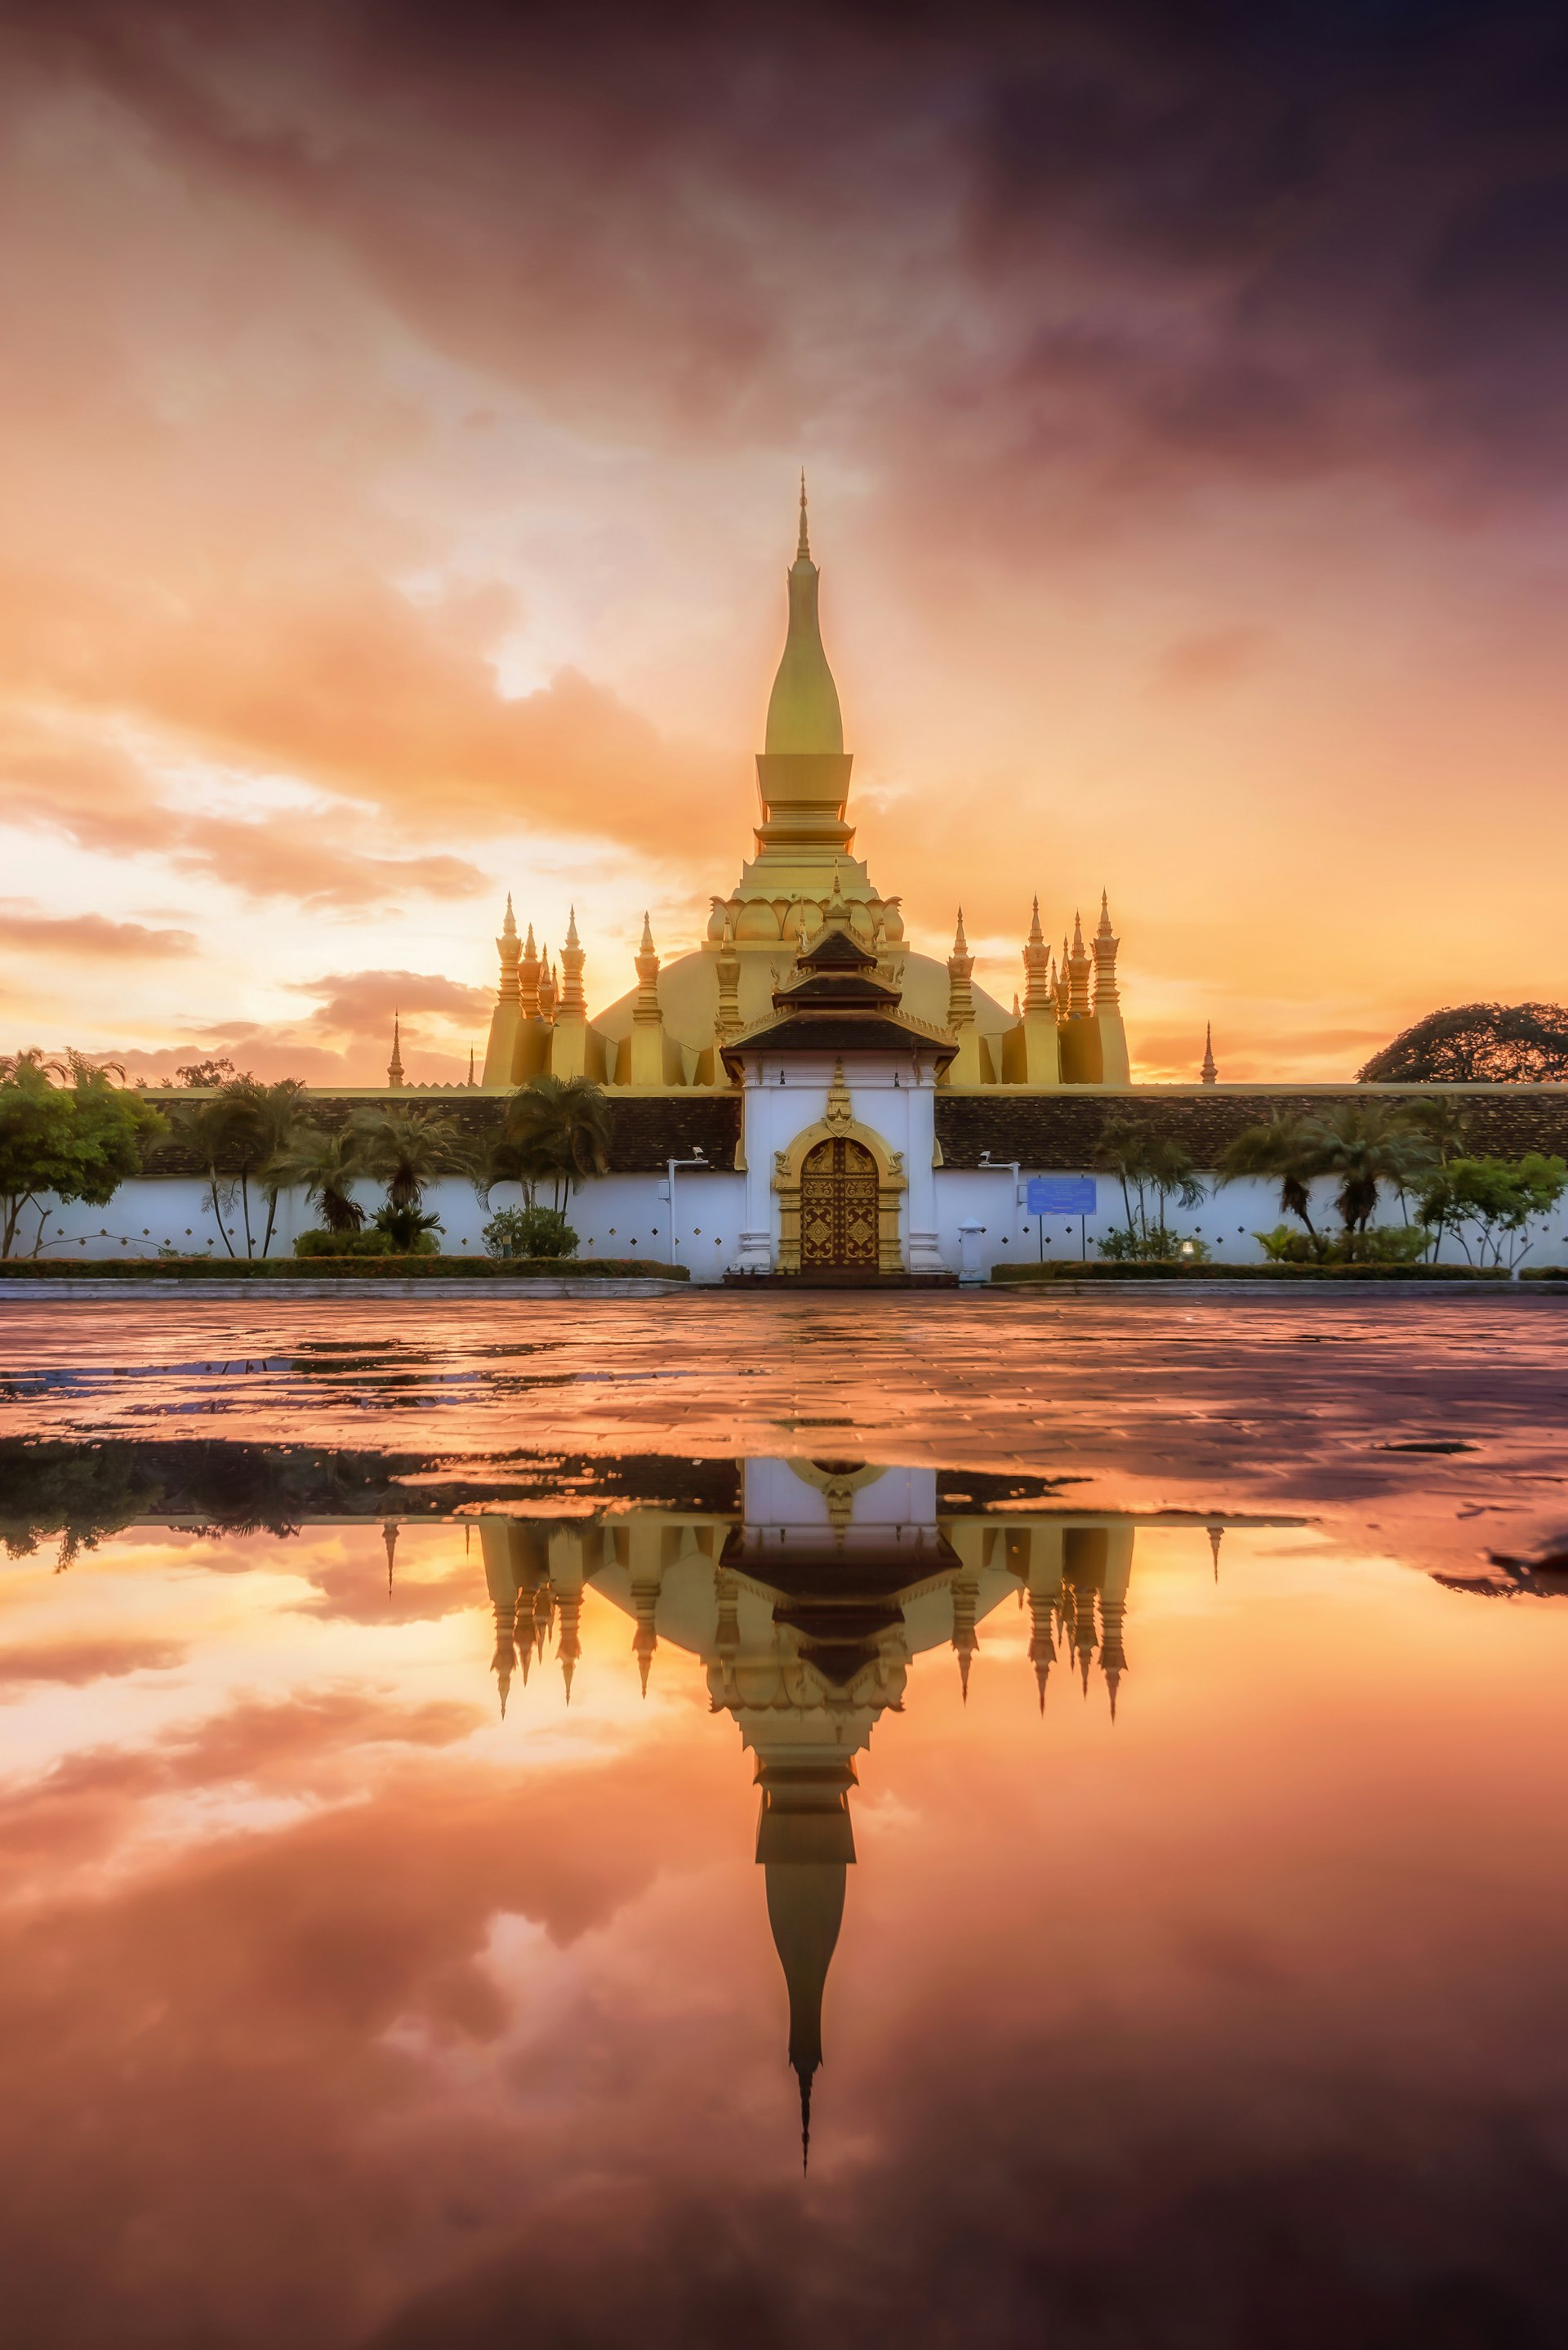 A gold temple building reflected in still water at dusk